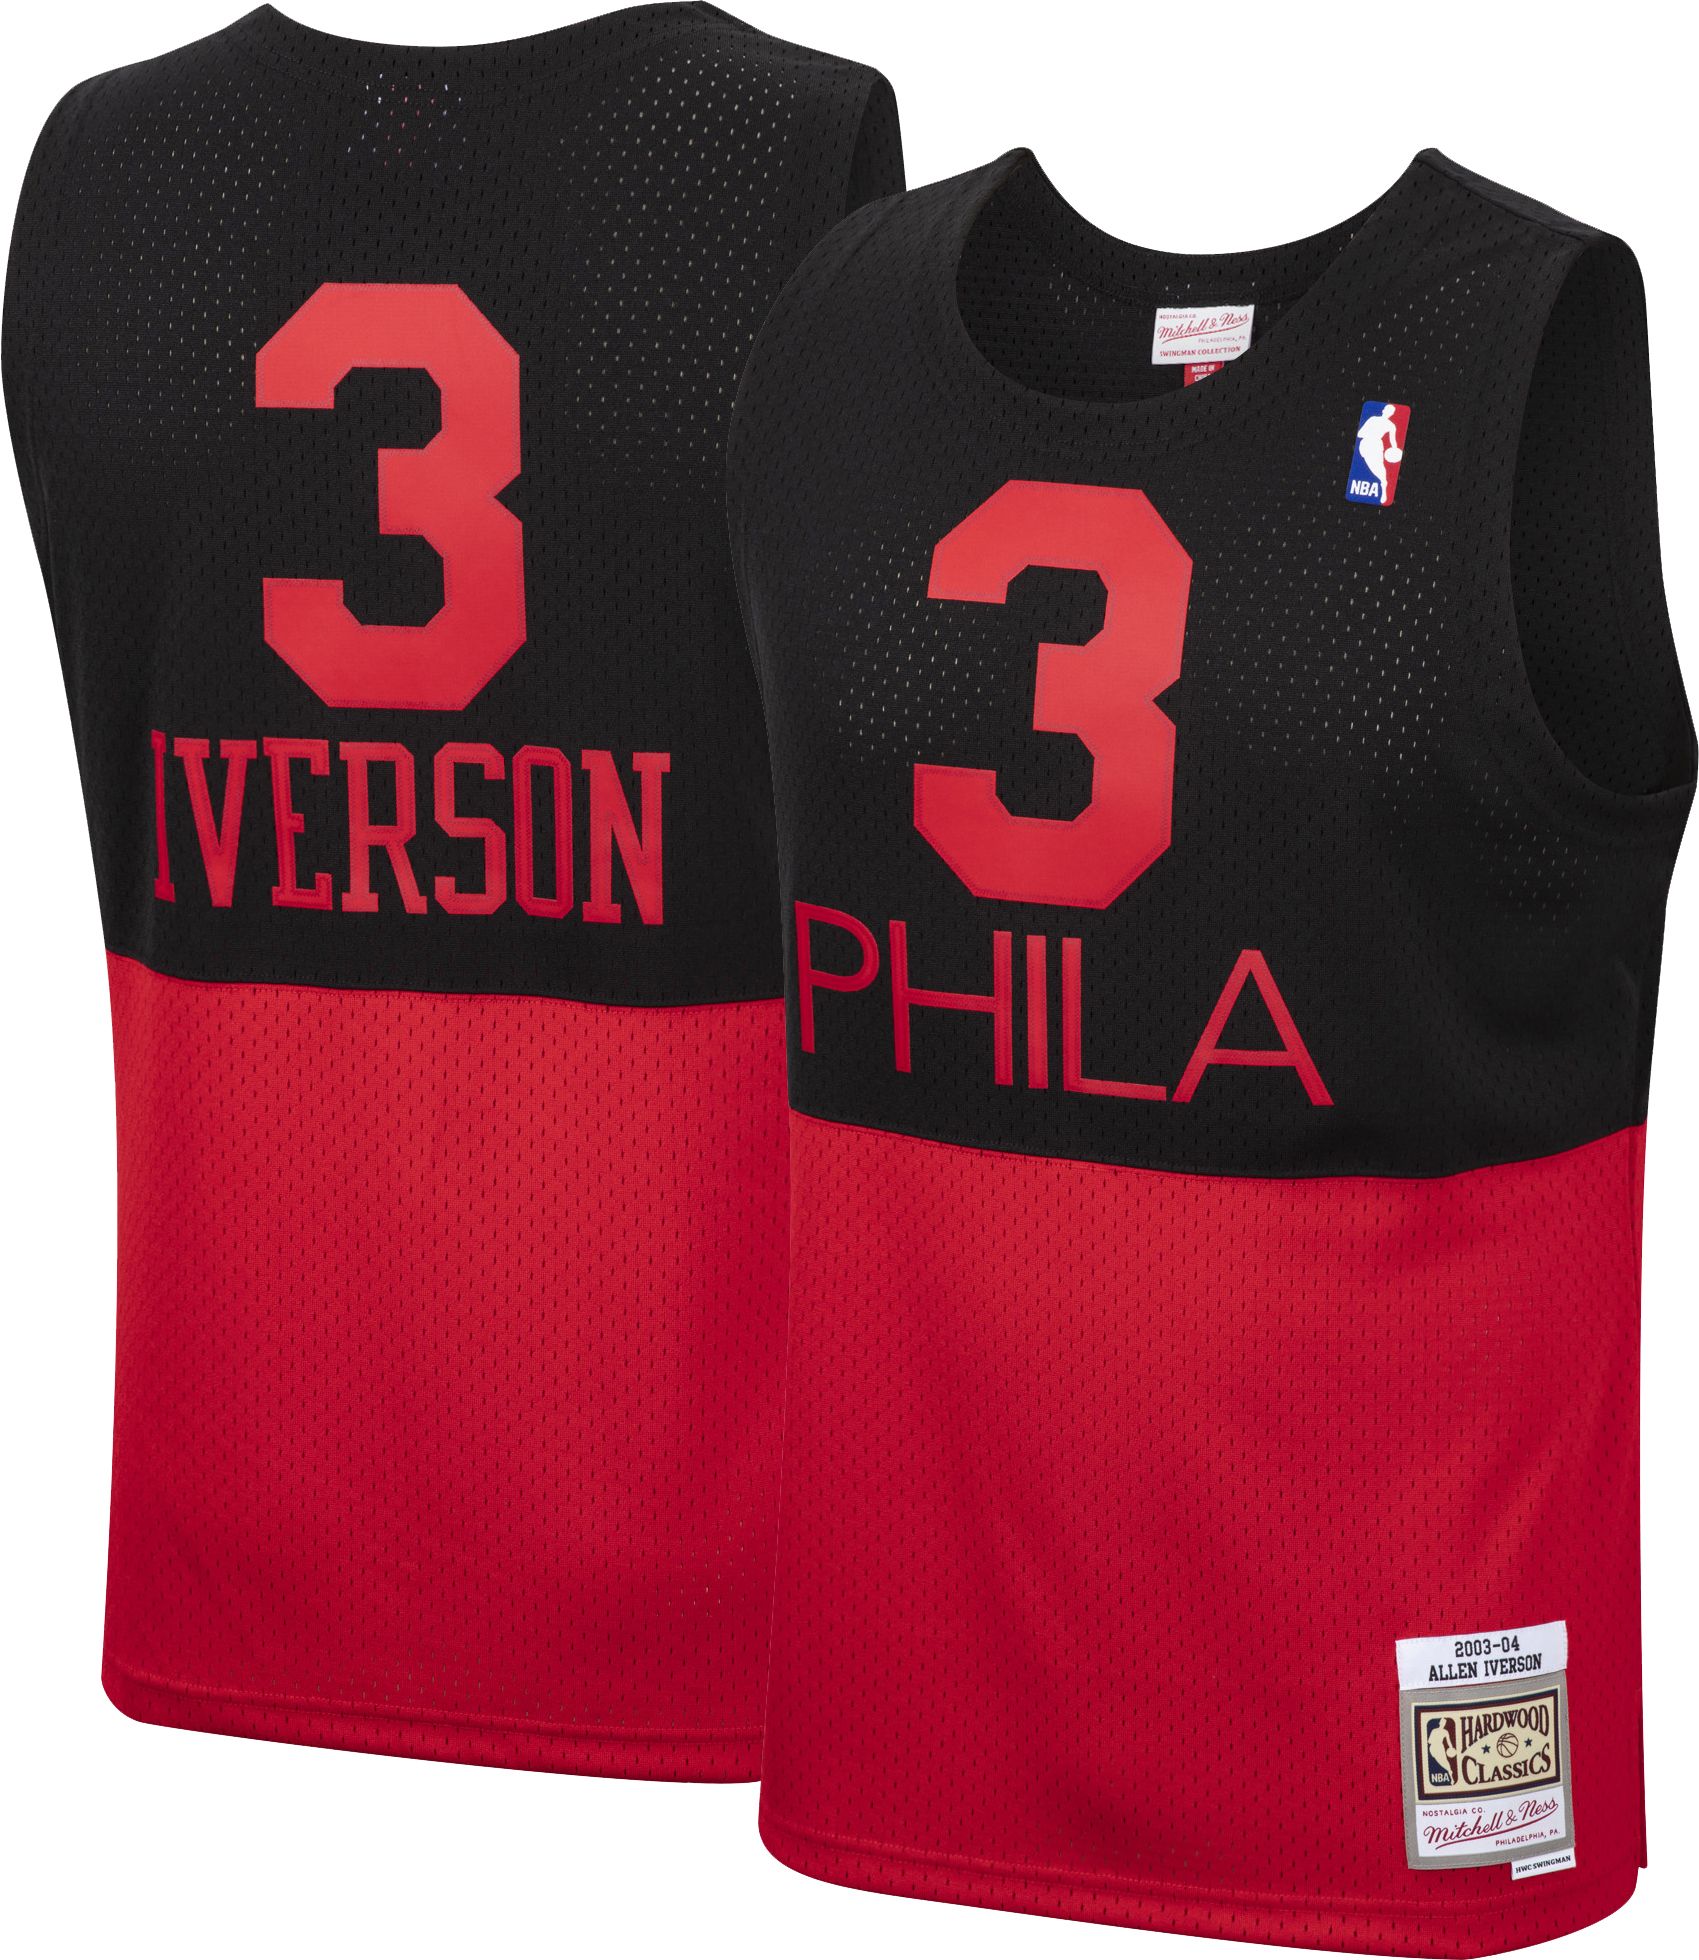 NBA_ Fast delivery Men Mitchell Ness Basketball Allen Iverson Jersey 3  Vintage Black White Red Blue Team Color Home Breathable Pure Cotton Good  Quality''nba''jersey 